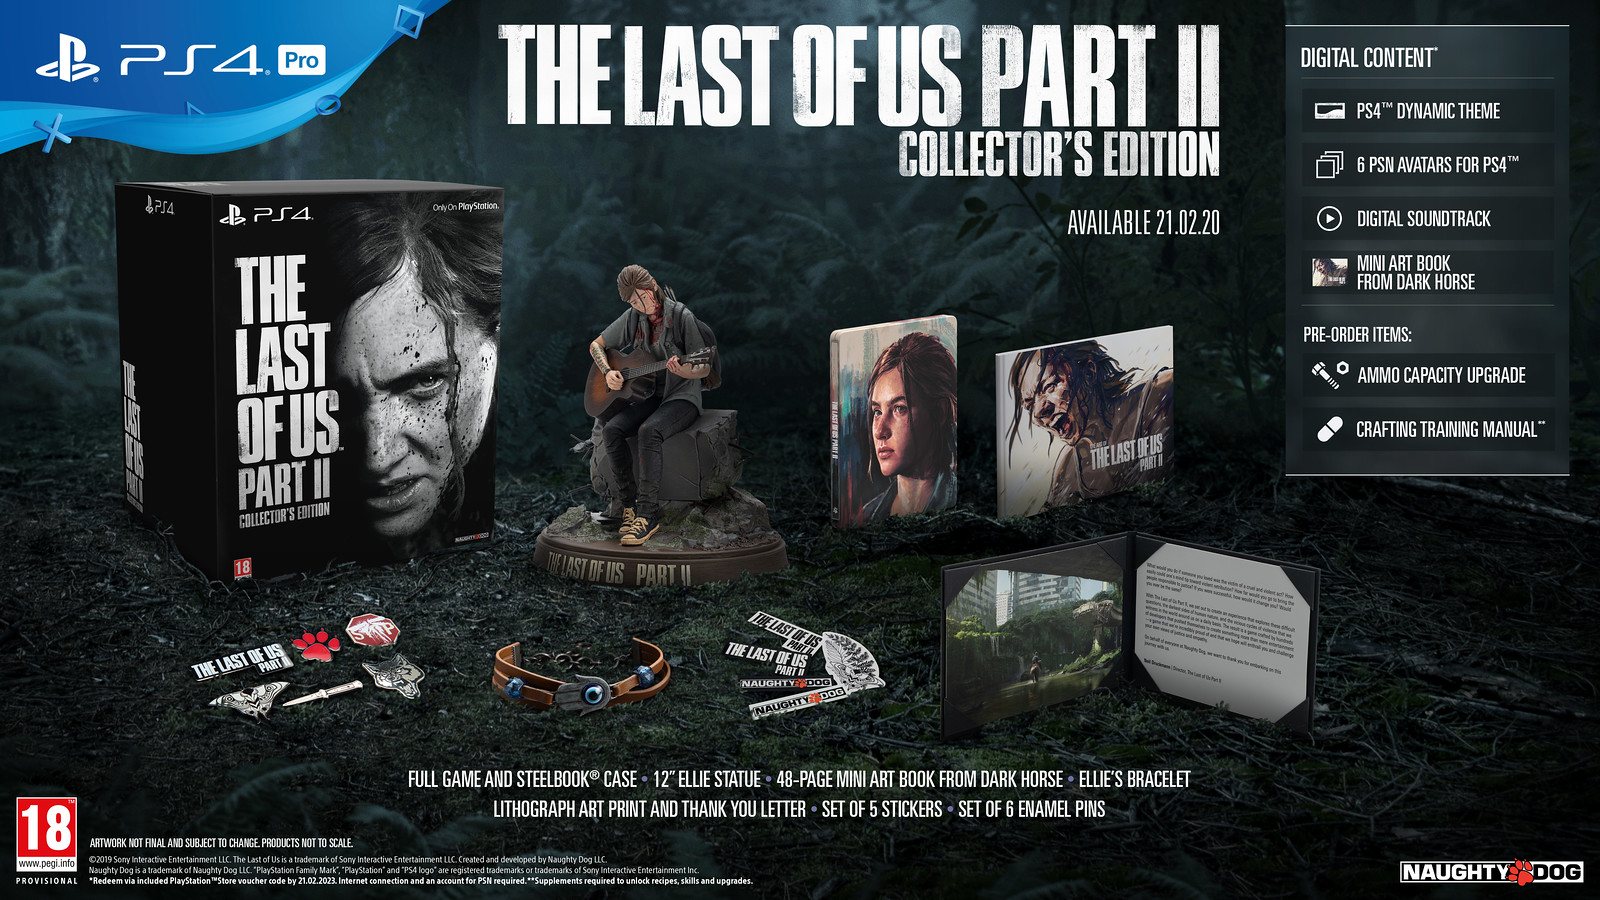 When will The Last of Us Part 2 come to PC? Release date